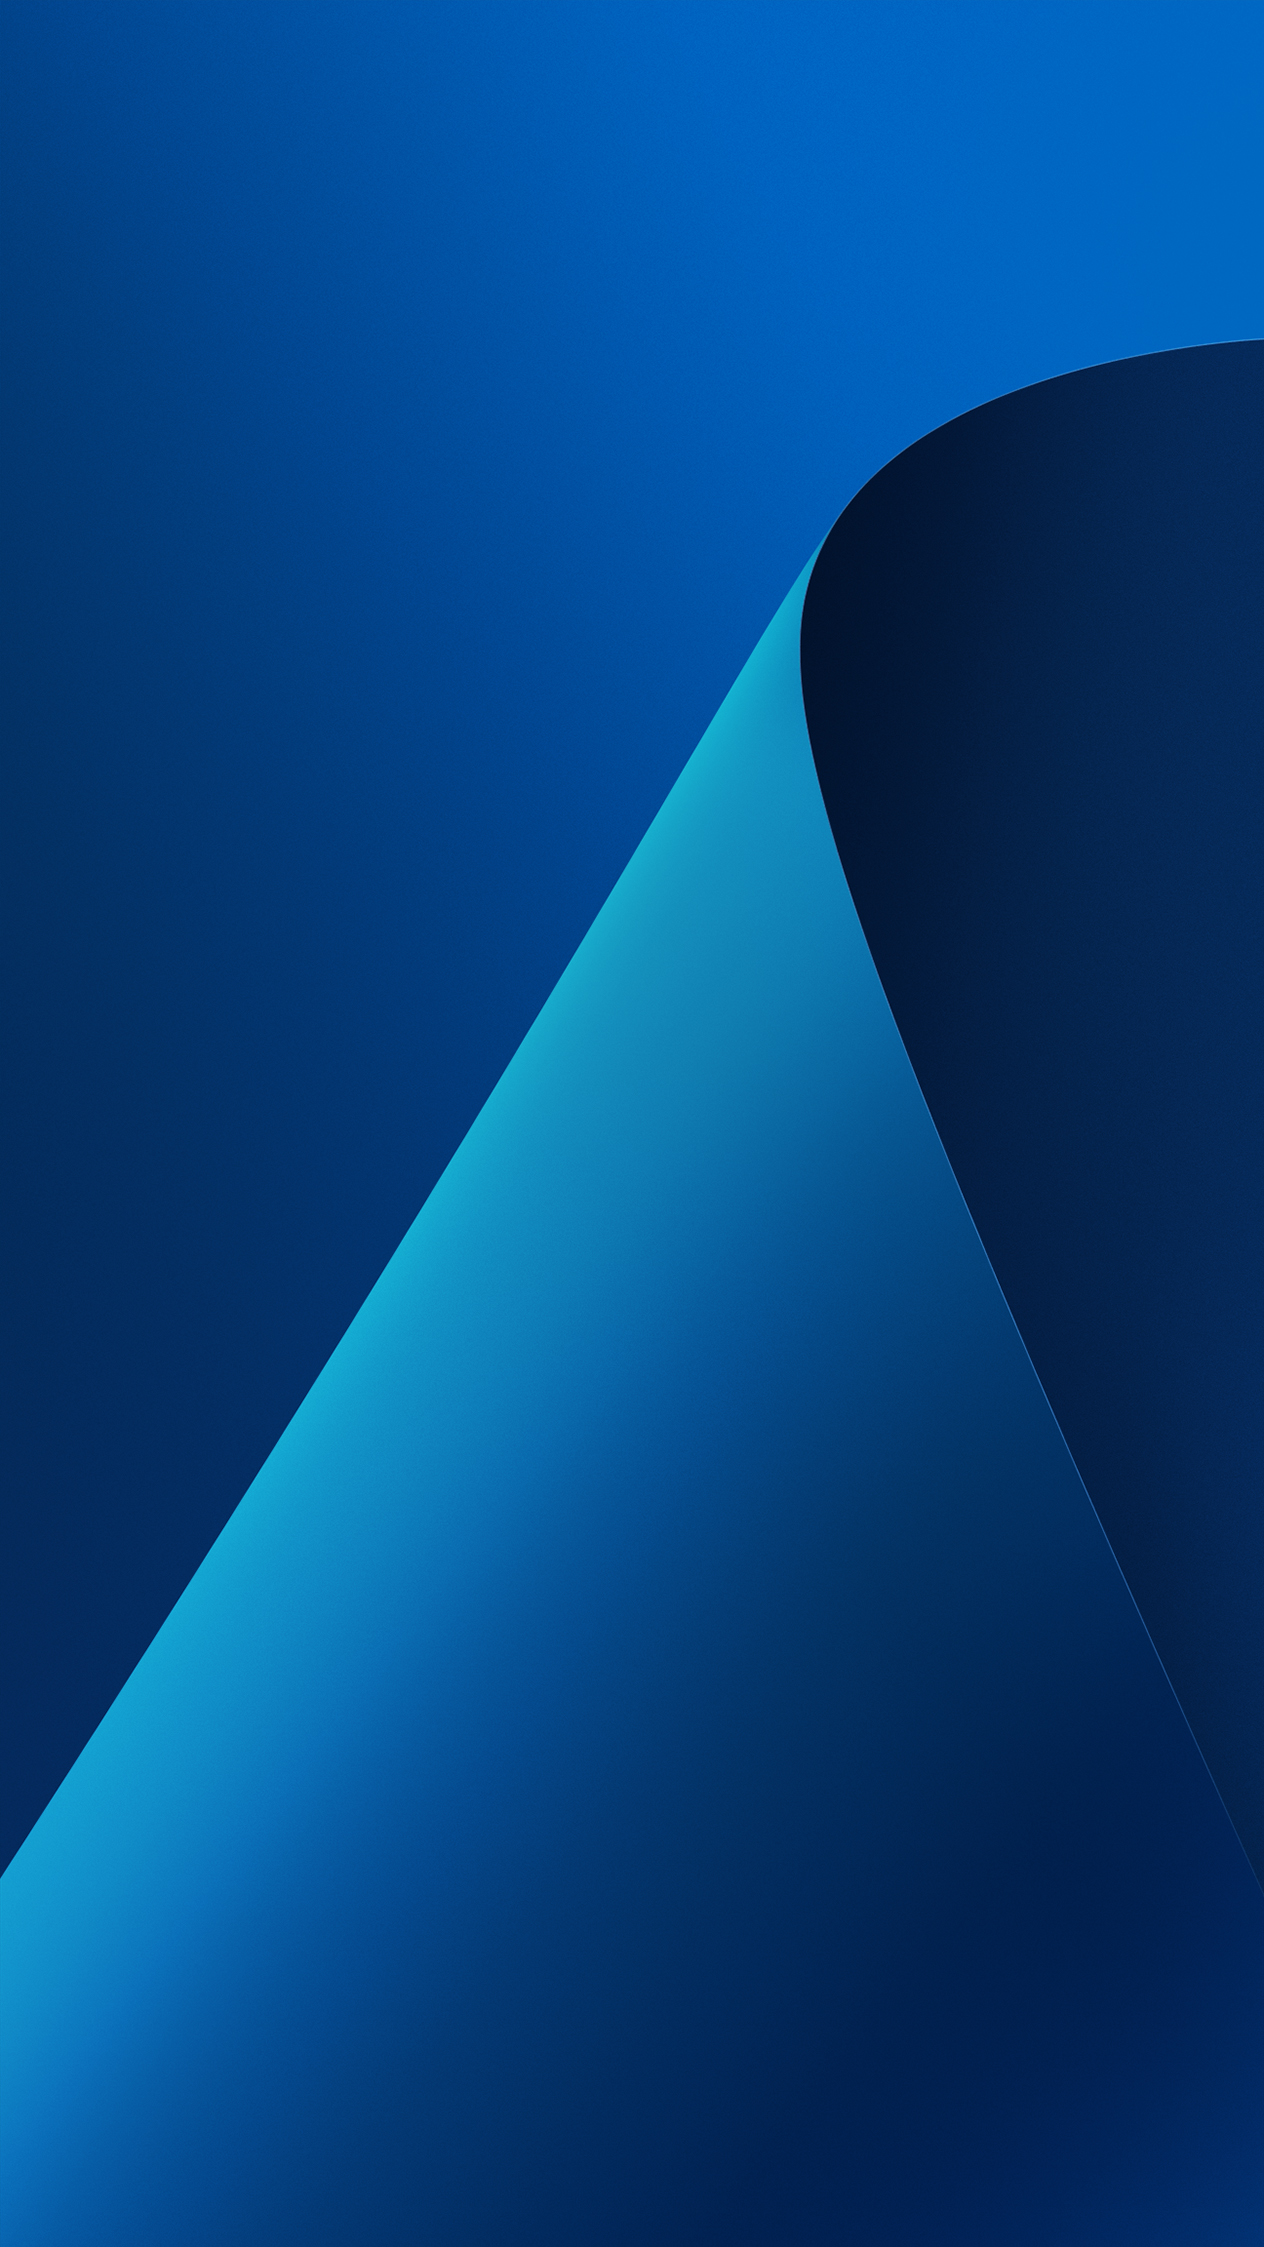 Download Vivo X21 and Asus ZenFone 5 Lite and 5Z stock wallpaper